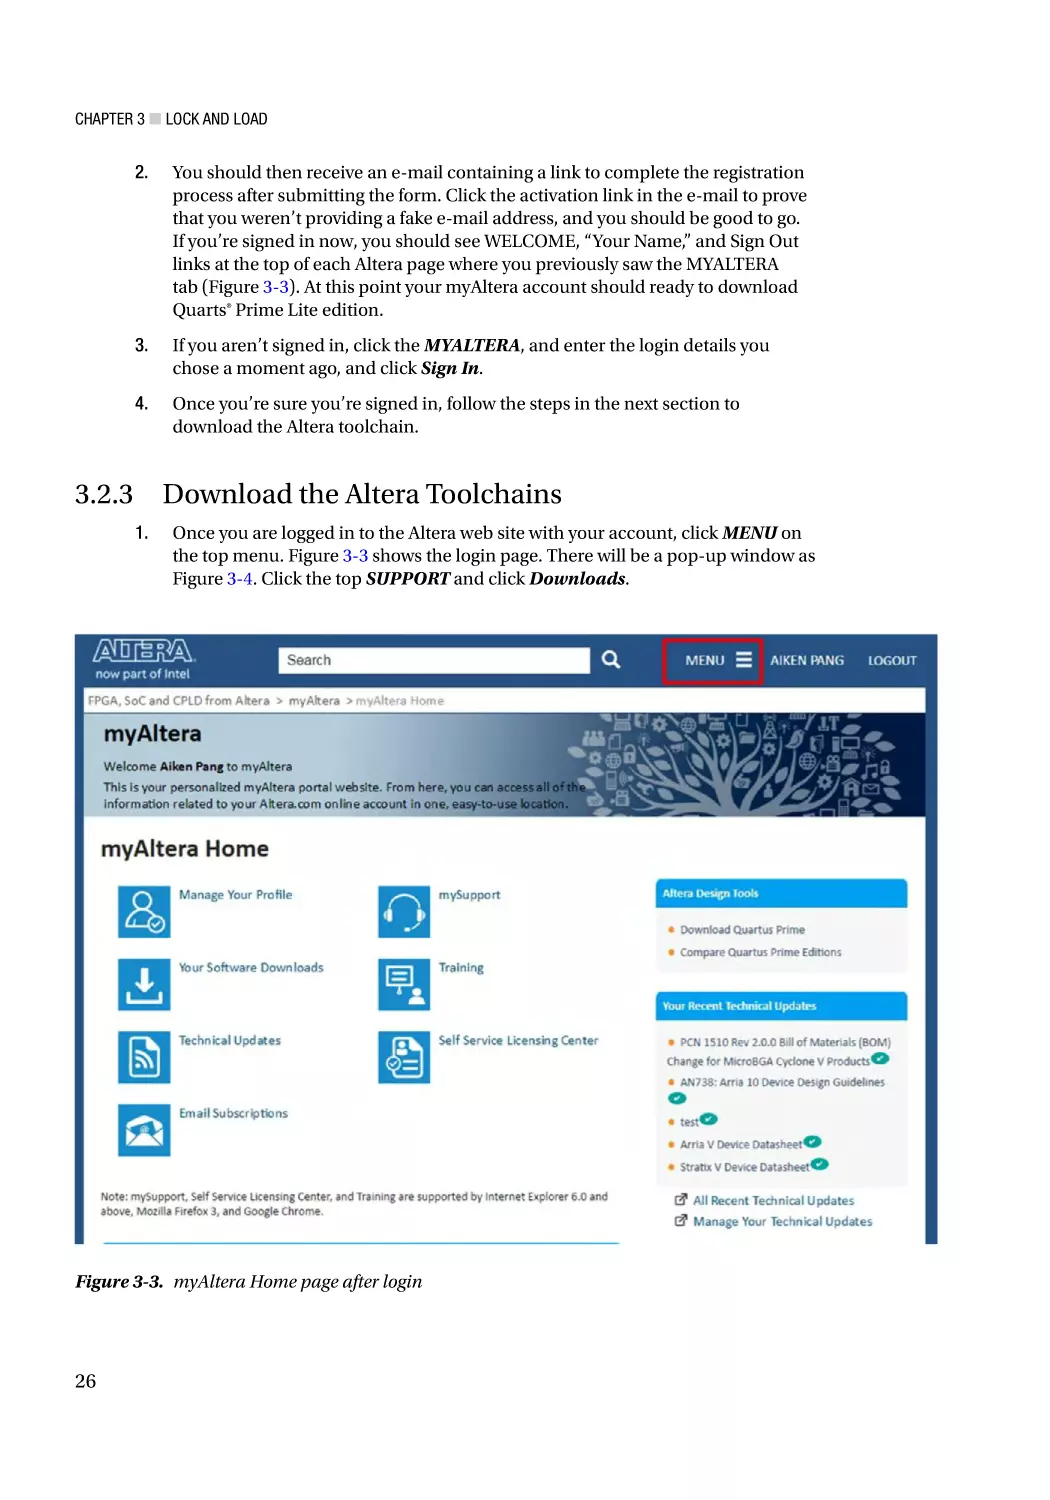 3.2.3 Download the Altera Toolchains